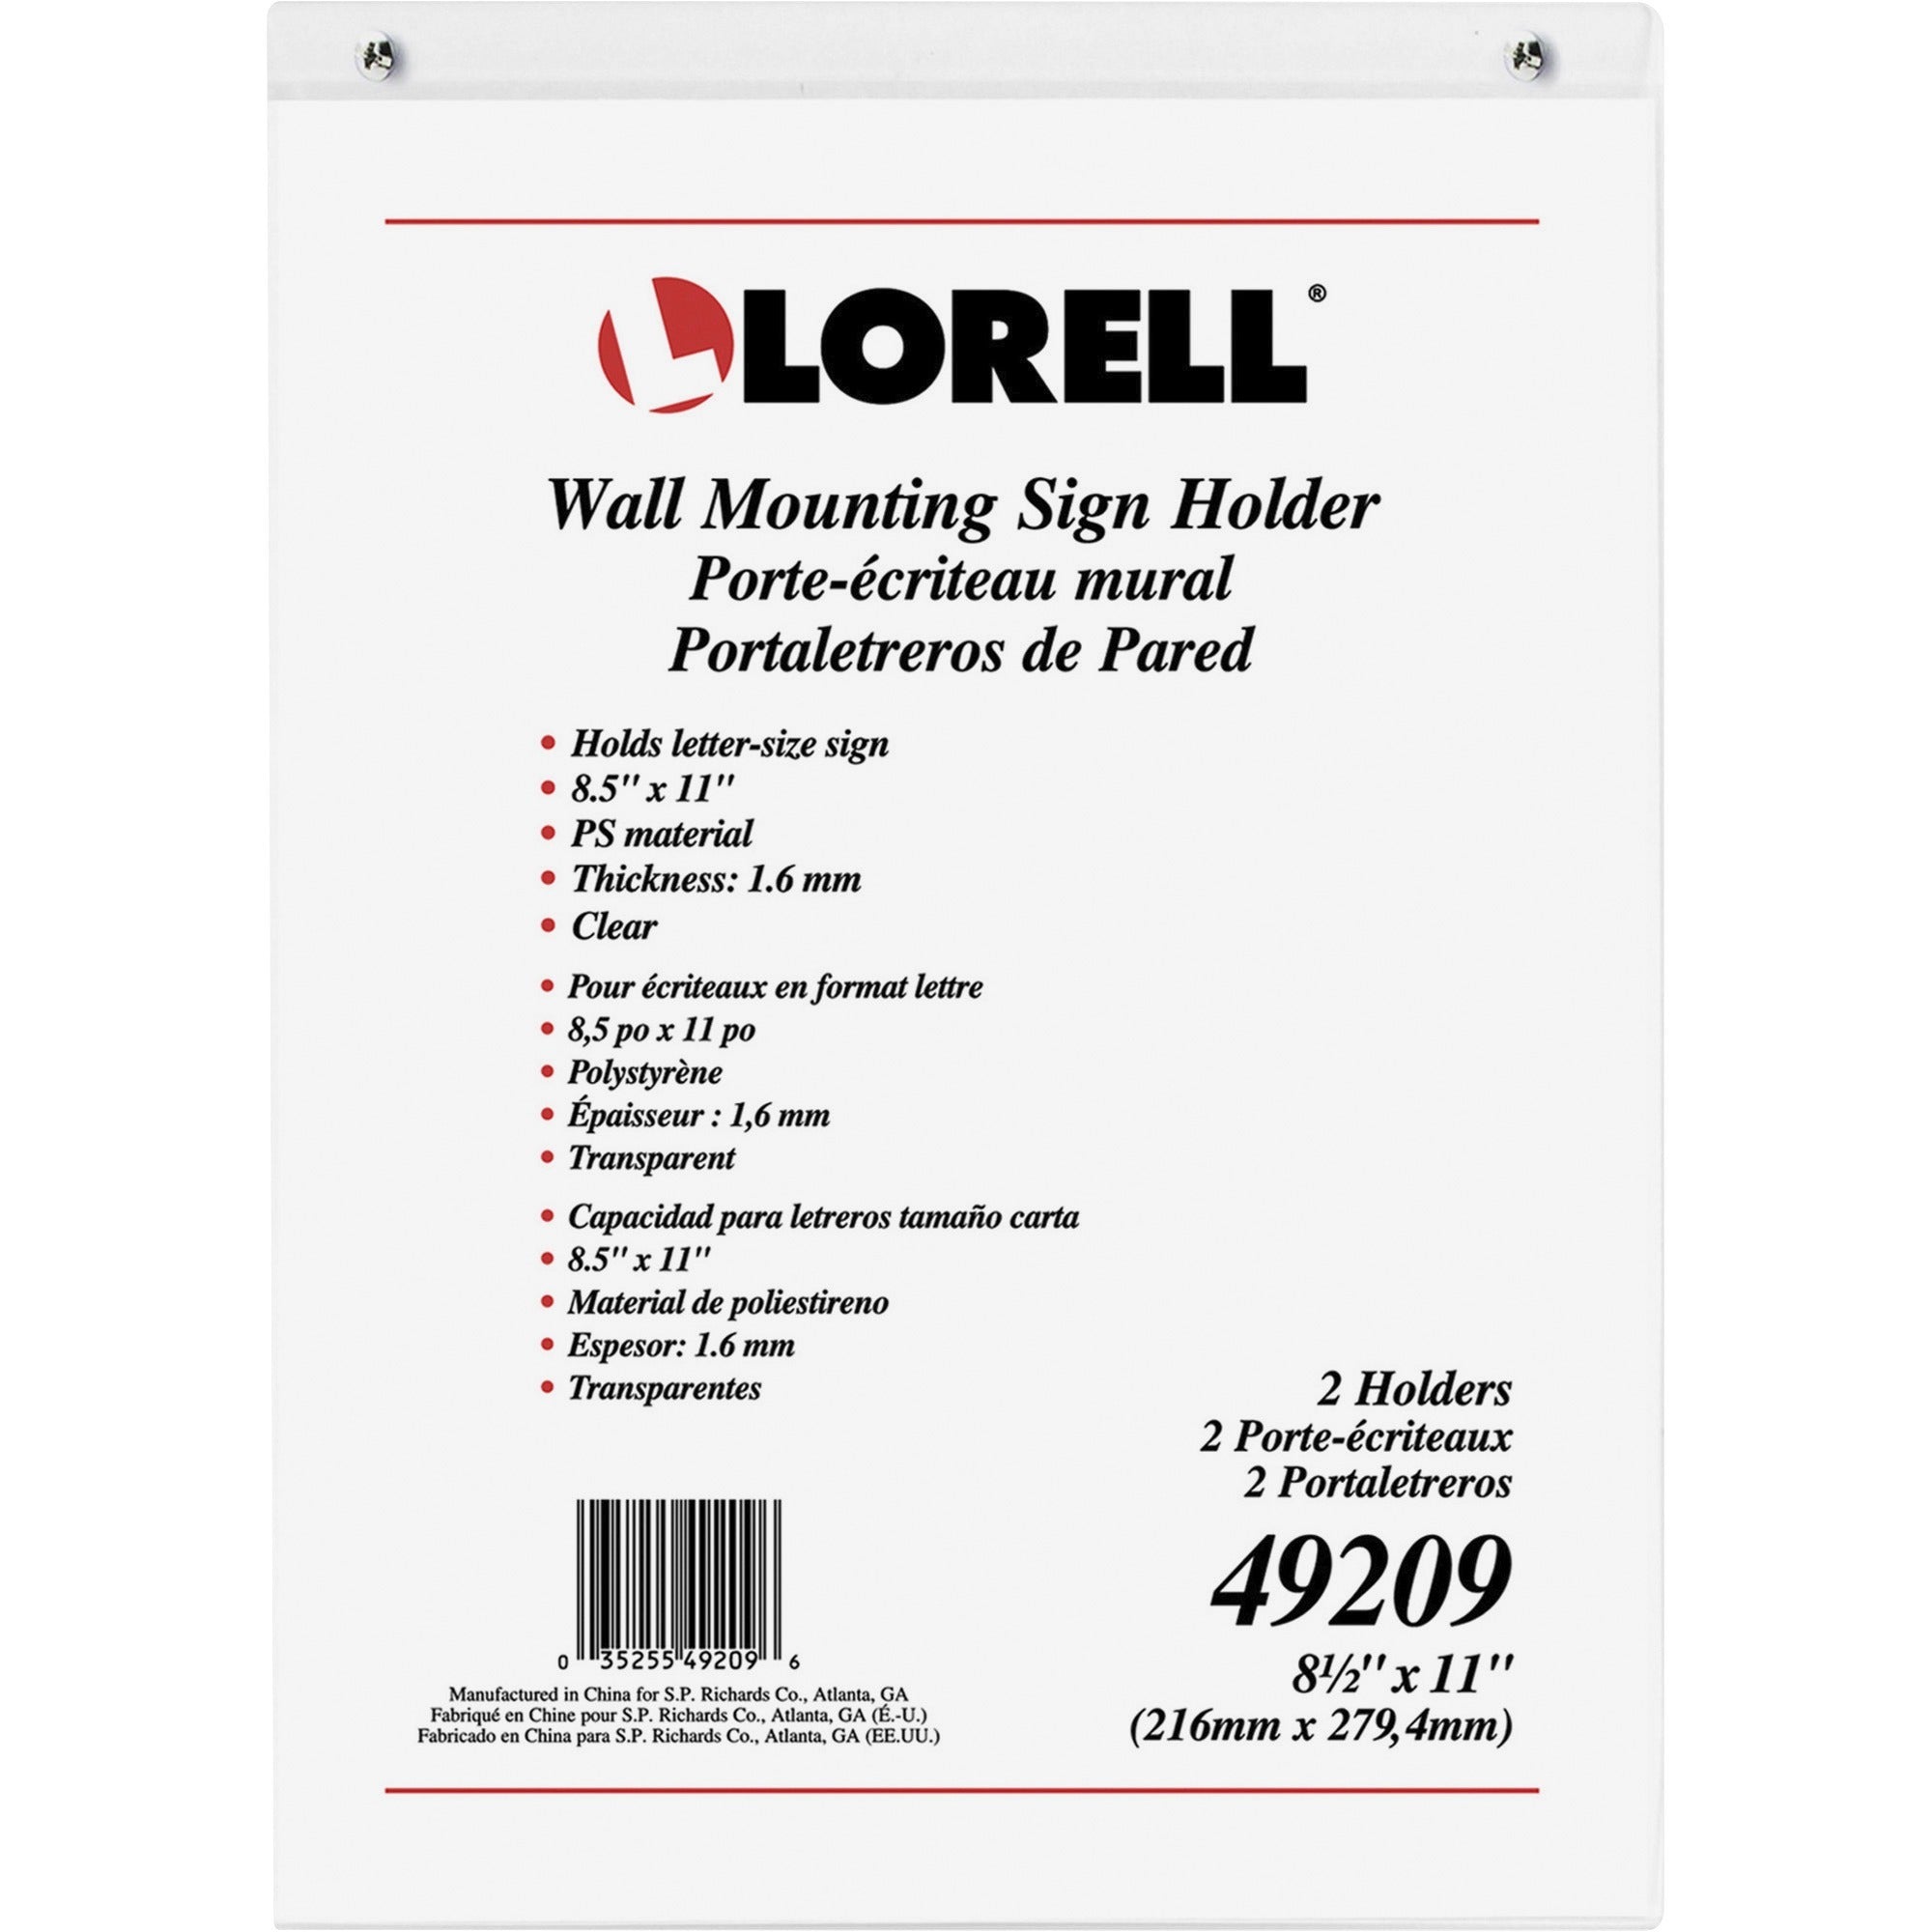 lorell-wall-mounted-sign-holders-support-850-x-11-media-acrylic-2-pack-clear_llr49209 - 2